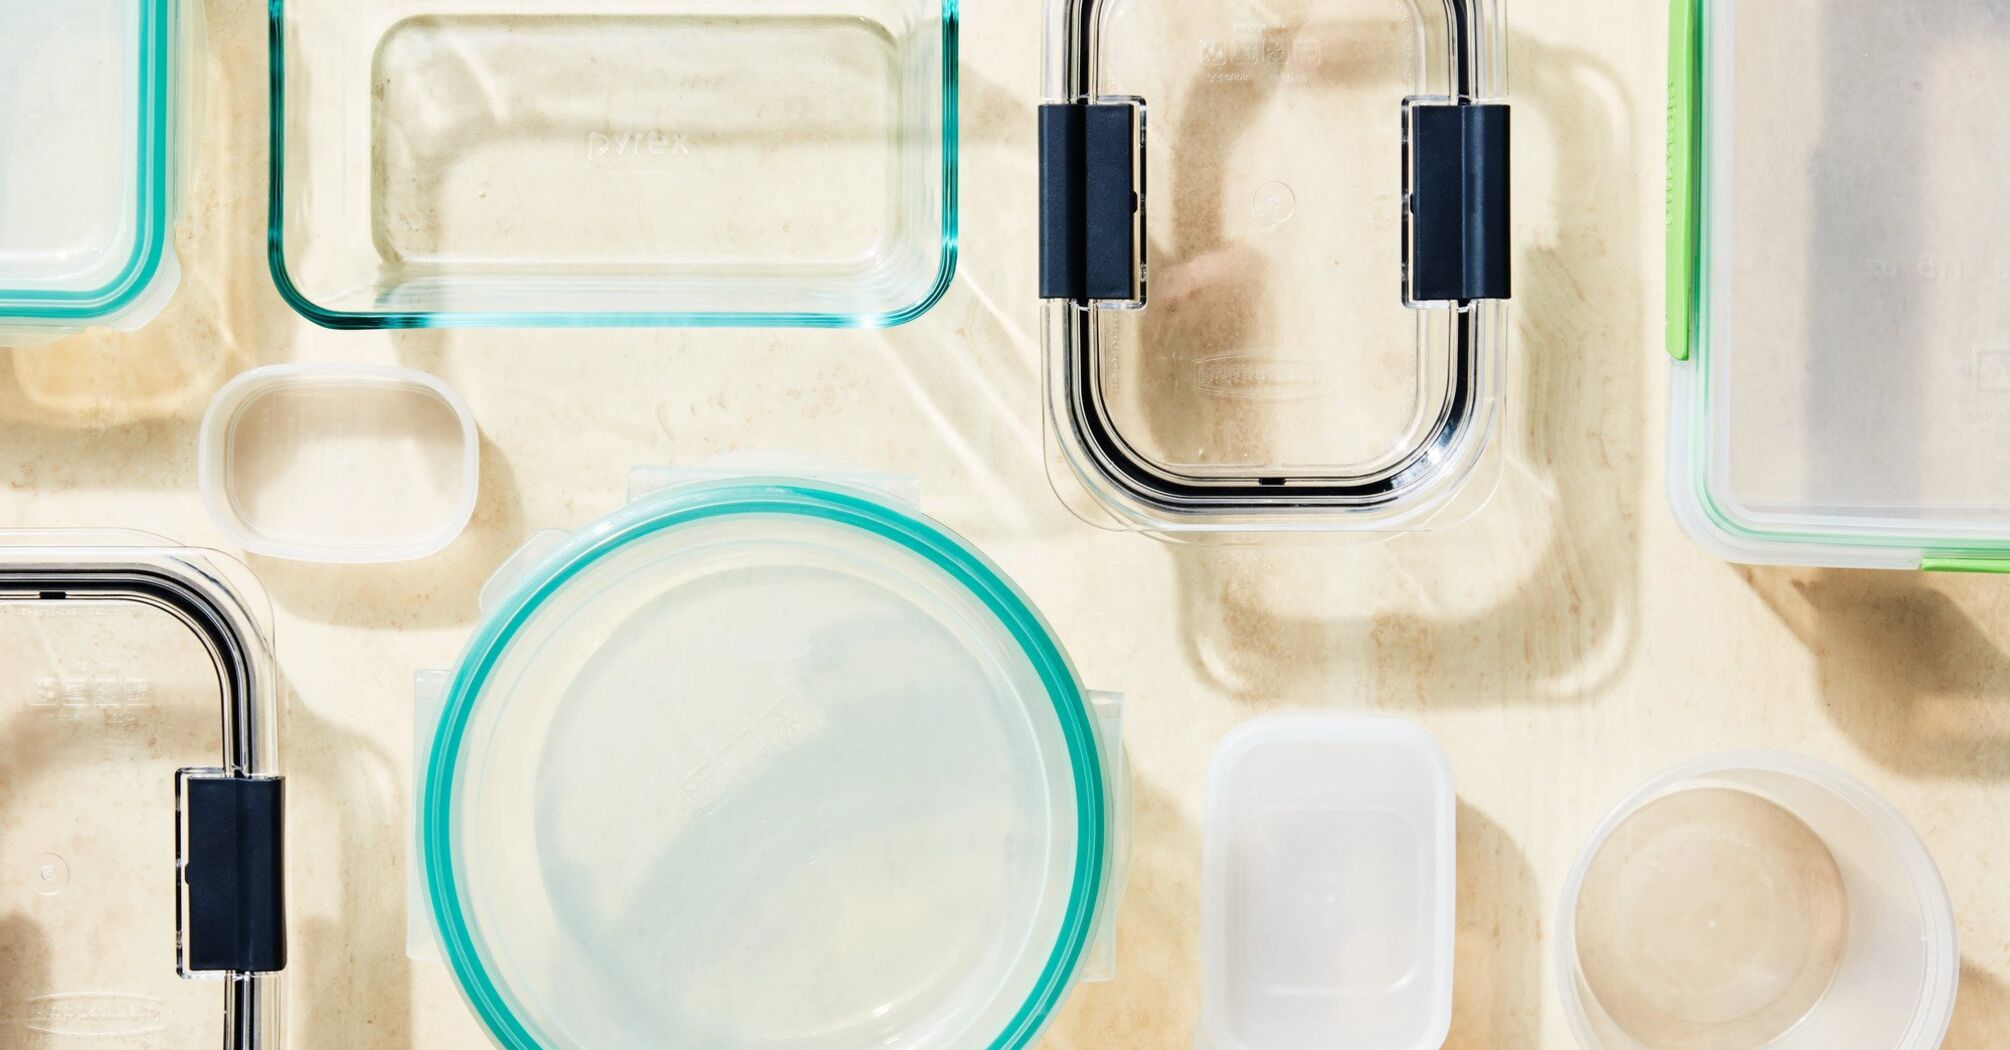 Comparison of plastic and glass containers